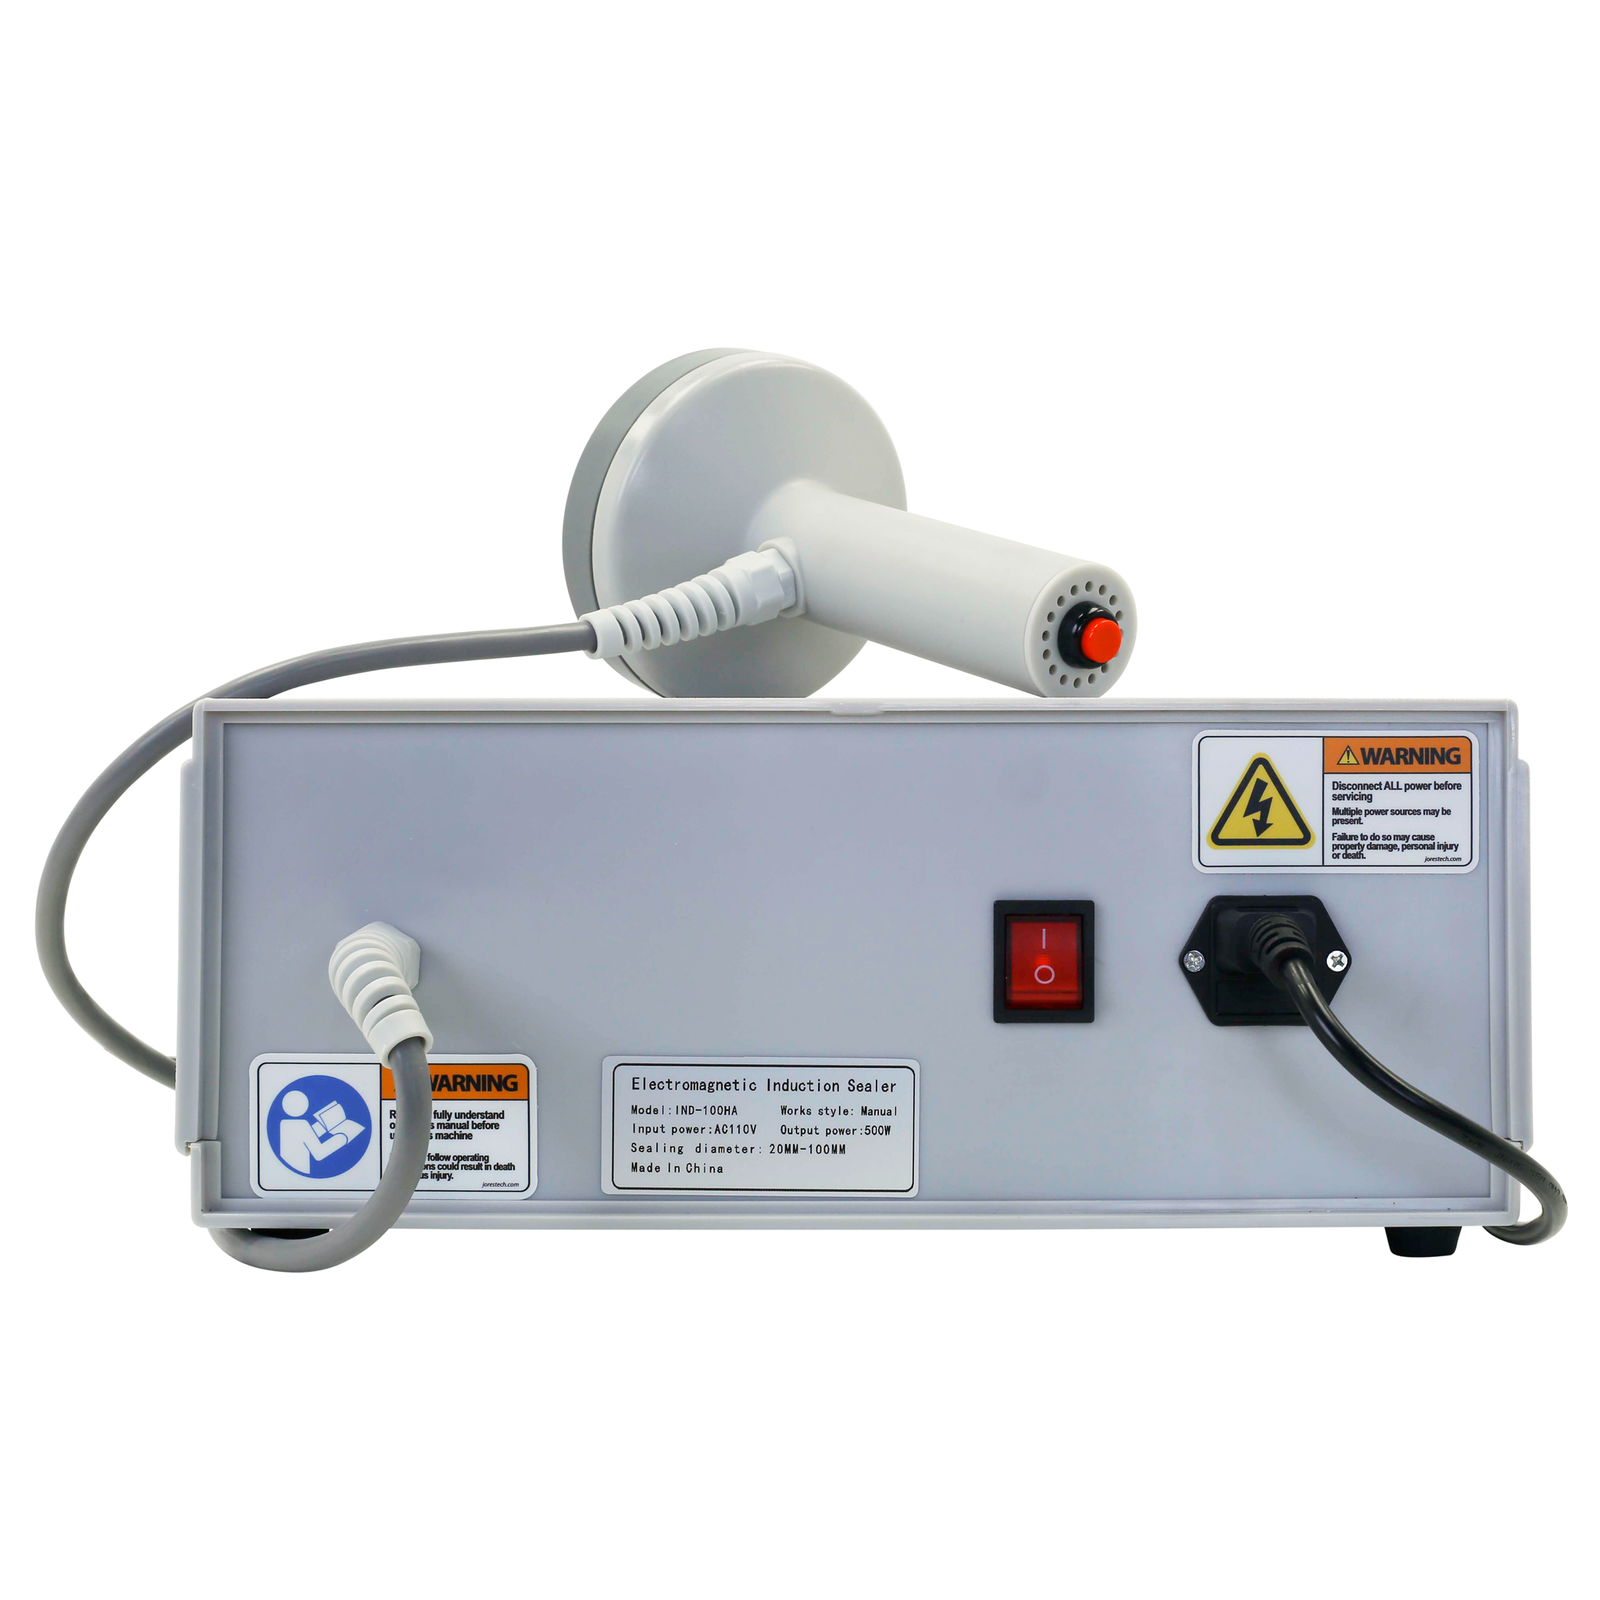 The Jorestech Manual induction cap sealer shown from the back over white background